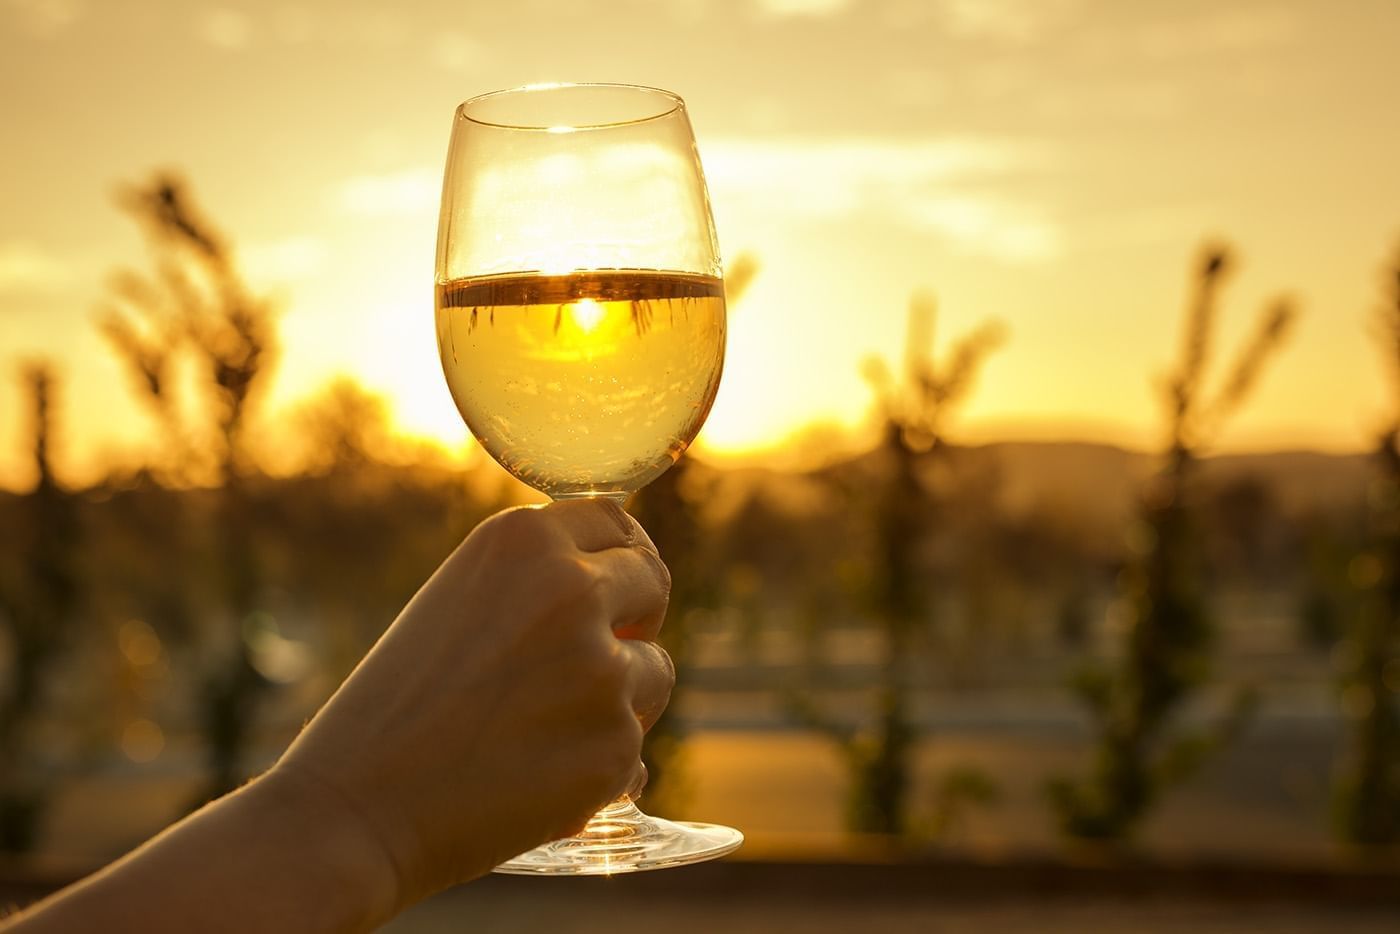 Wine glass held up with the sun setting in the distance